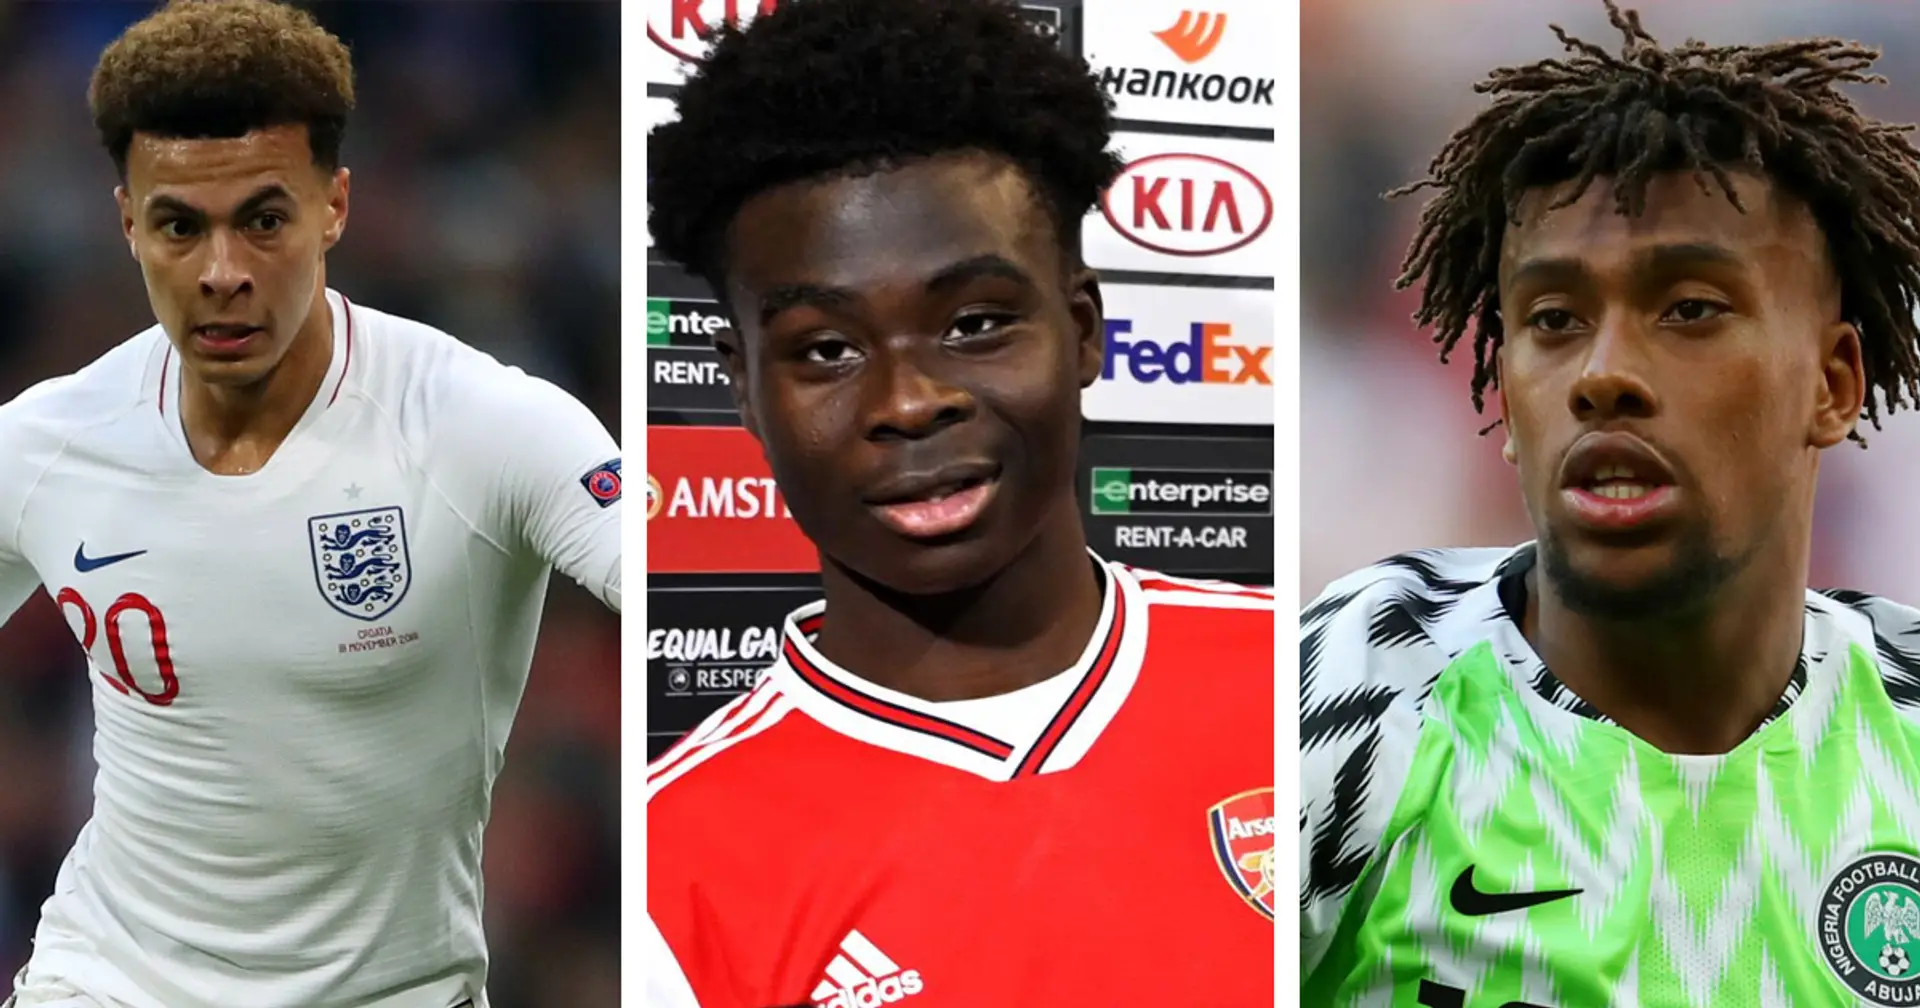 Bukayo Saka yet to decide: Alex Iwobi & 9 other footballers who hesitated between England and Nigeria, what they chose and how they fared